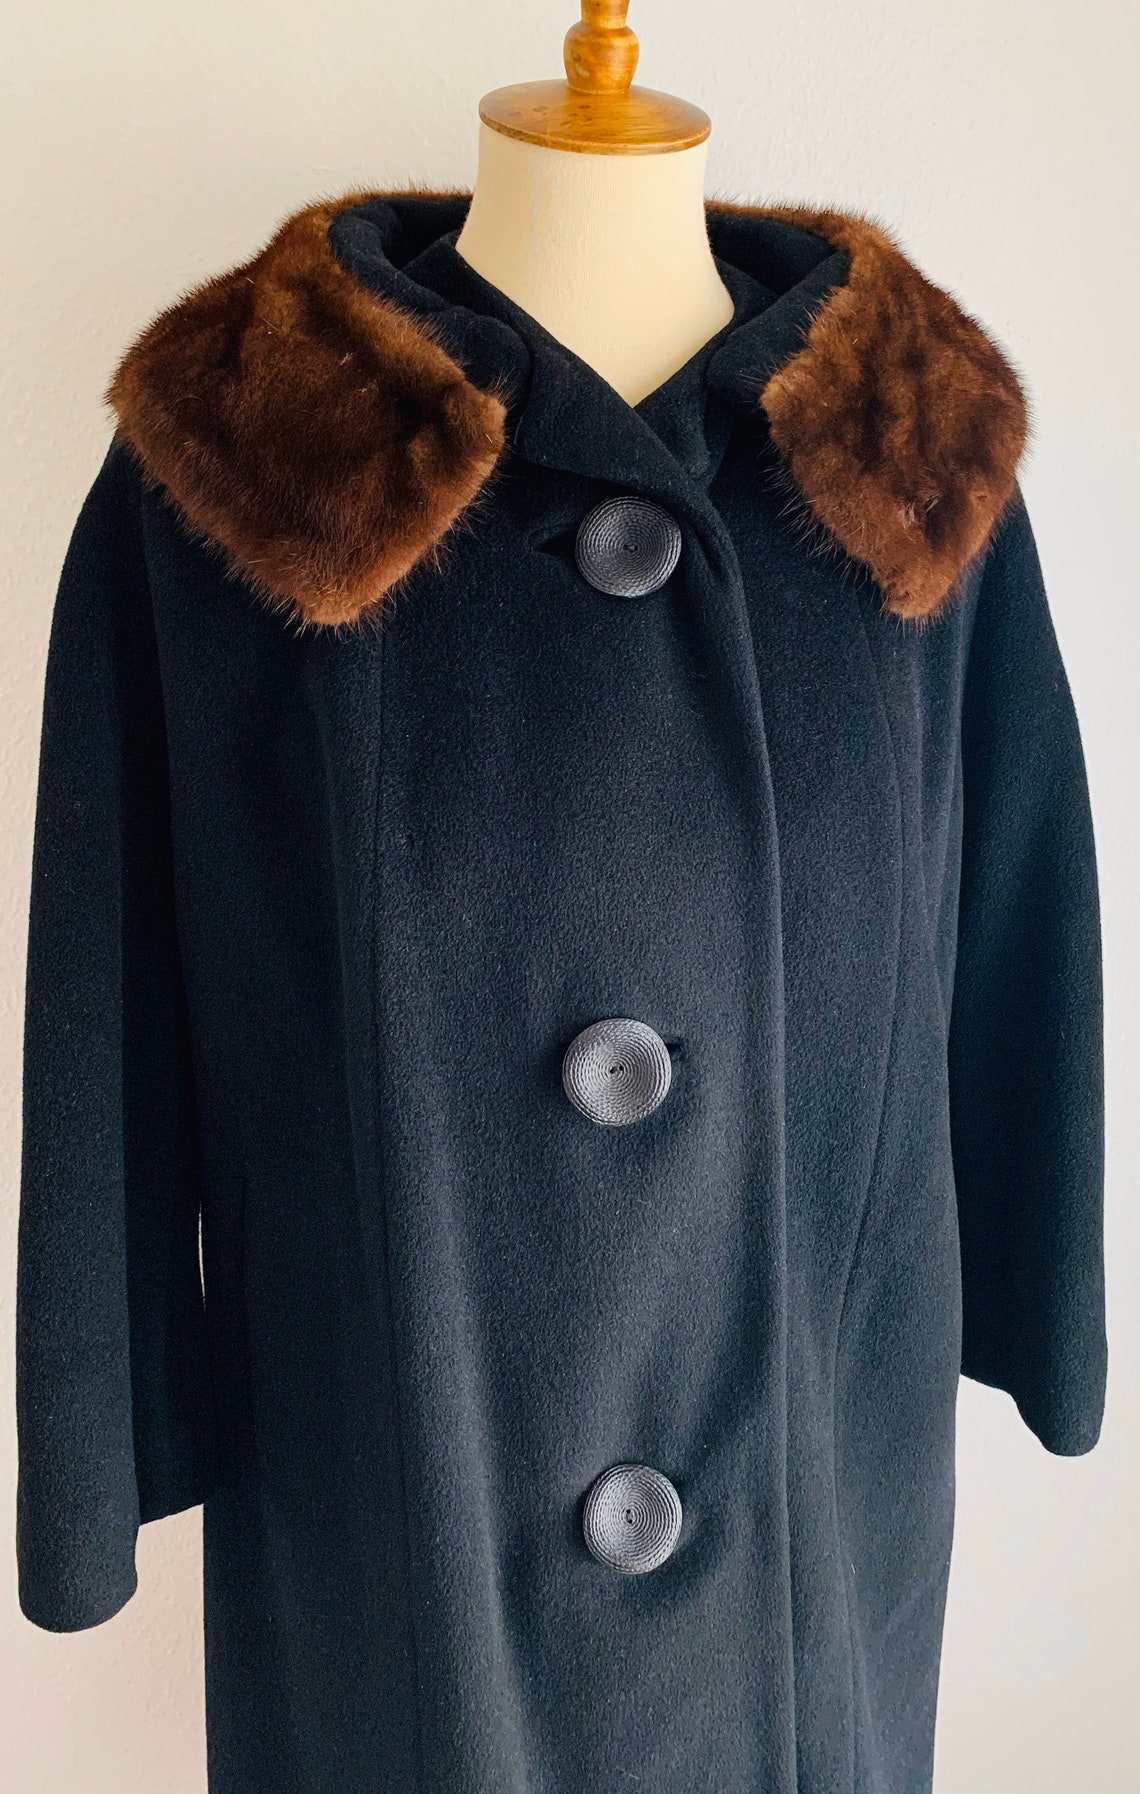 Vintage Black Neiman Marcus Coat with Brown Fur Collar Size | Etsy